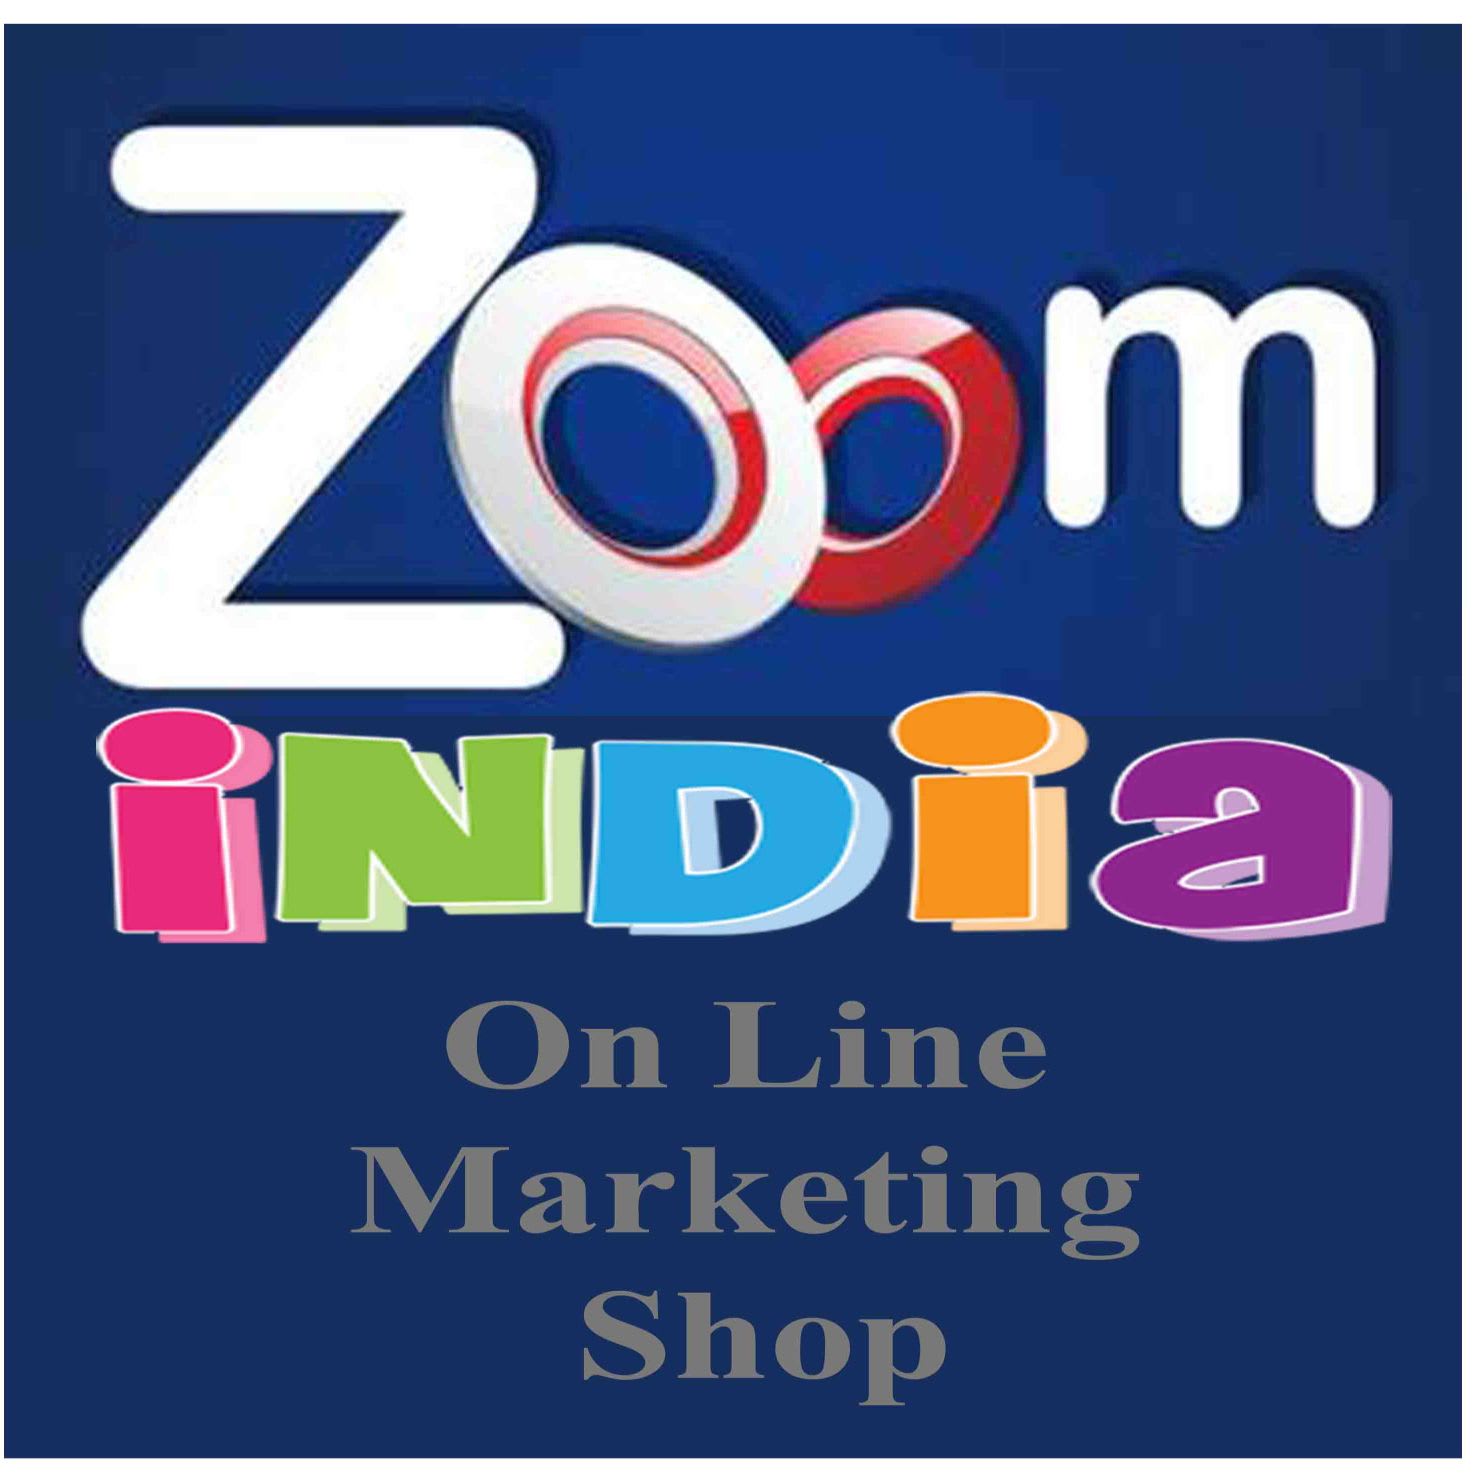 Zoom India Online Shopping Shop